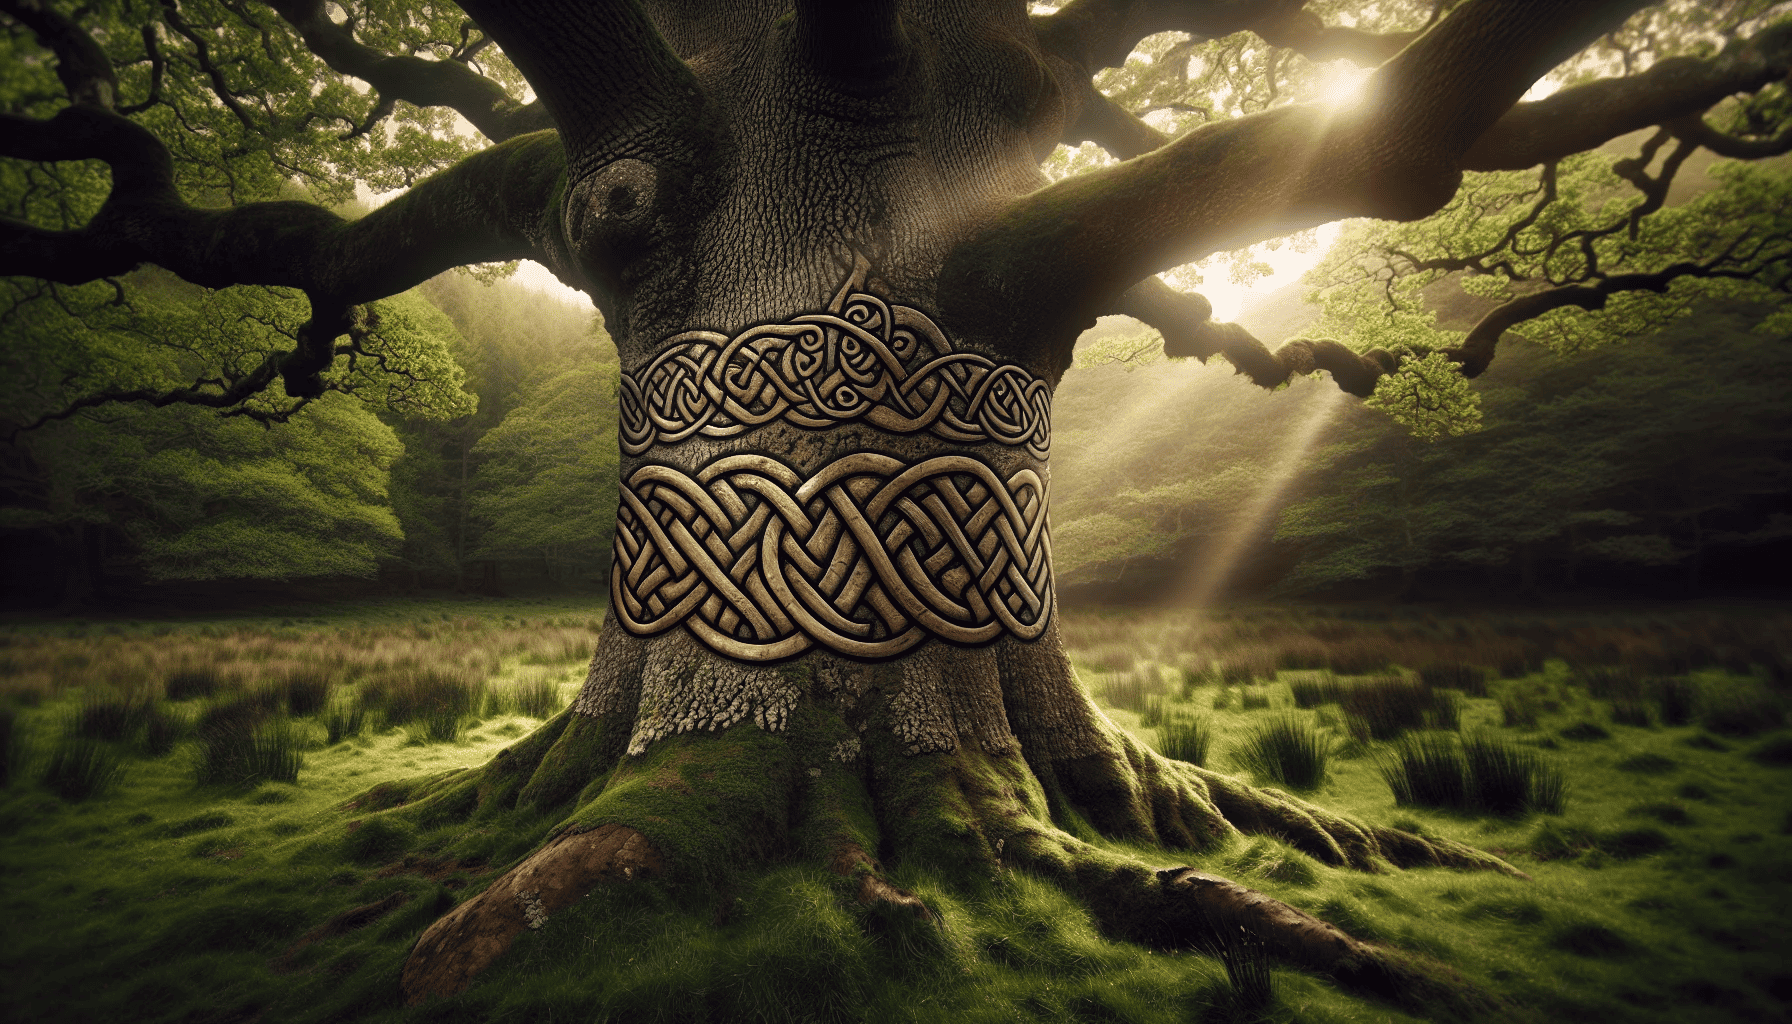 Illustration of a majestic oak tree with Celtic knots intertwined in its branches